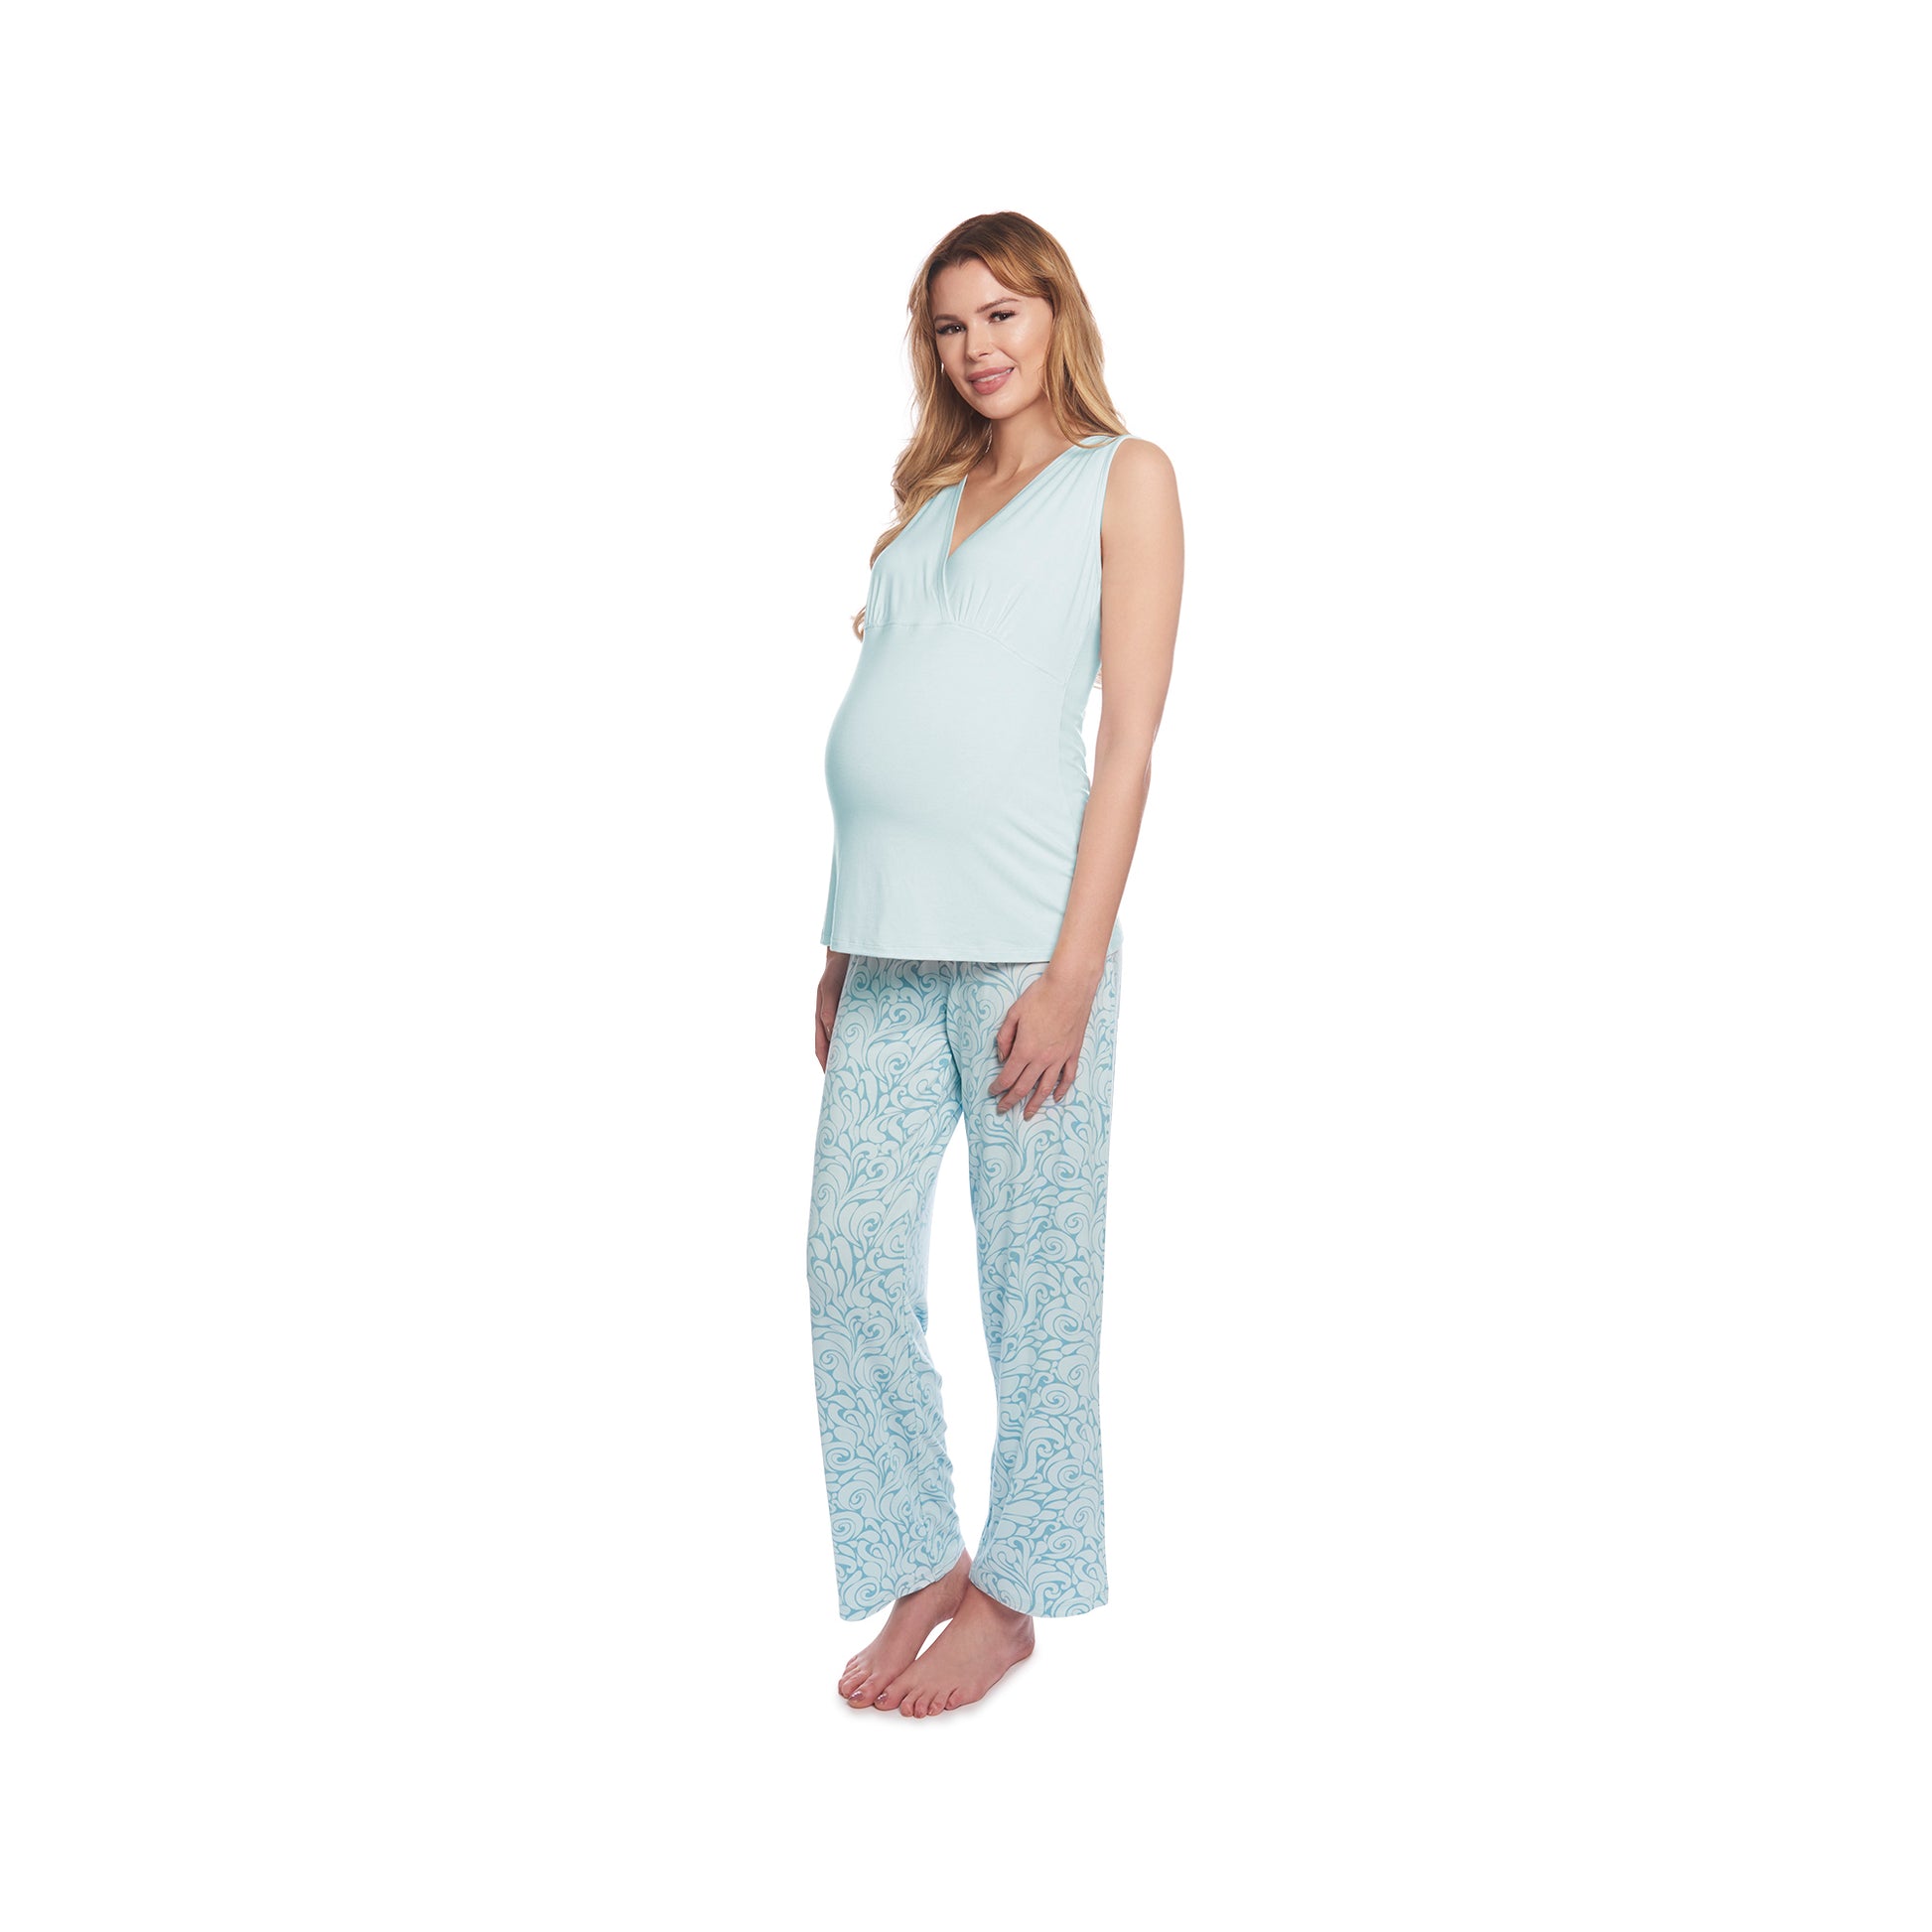 Waves Analise 3-Piece Set, pregnant woman wearing criss-cross bust tank top and pant.